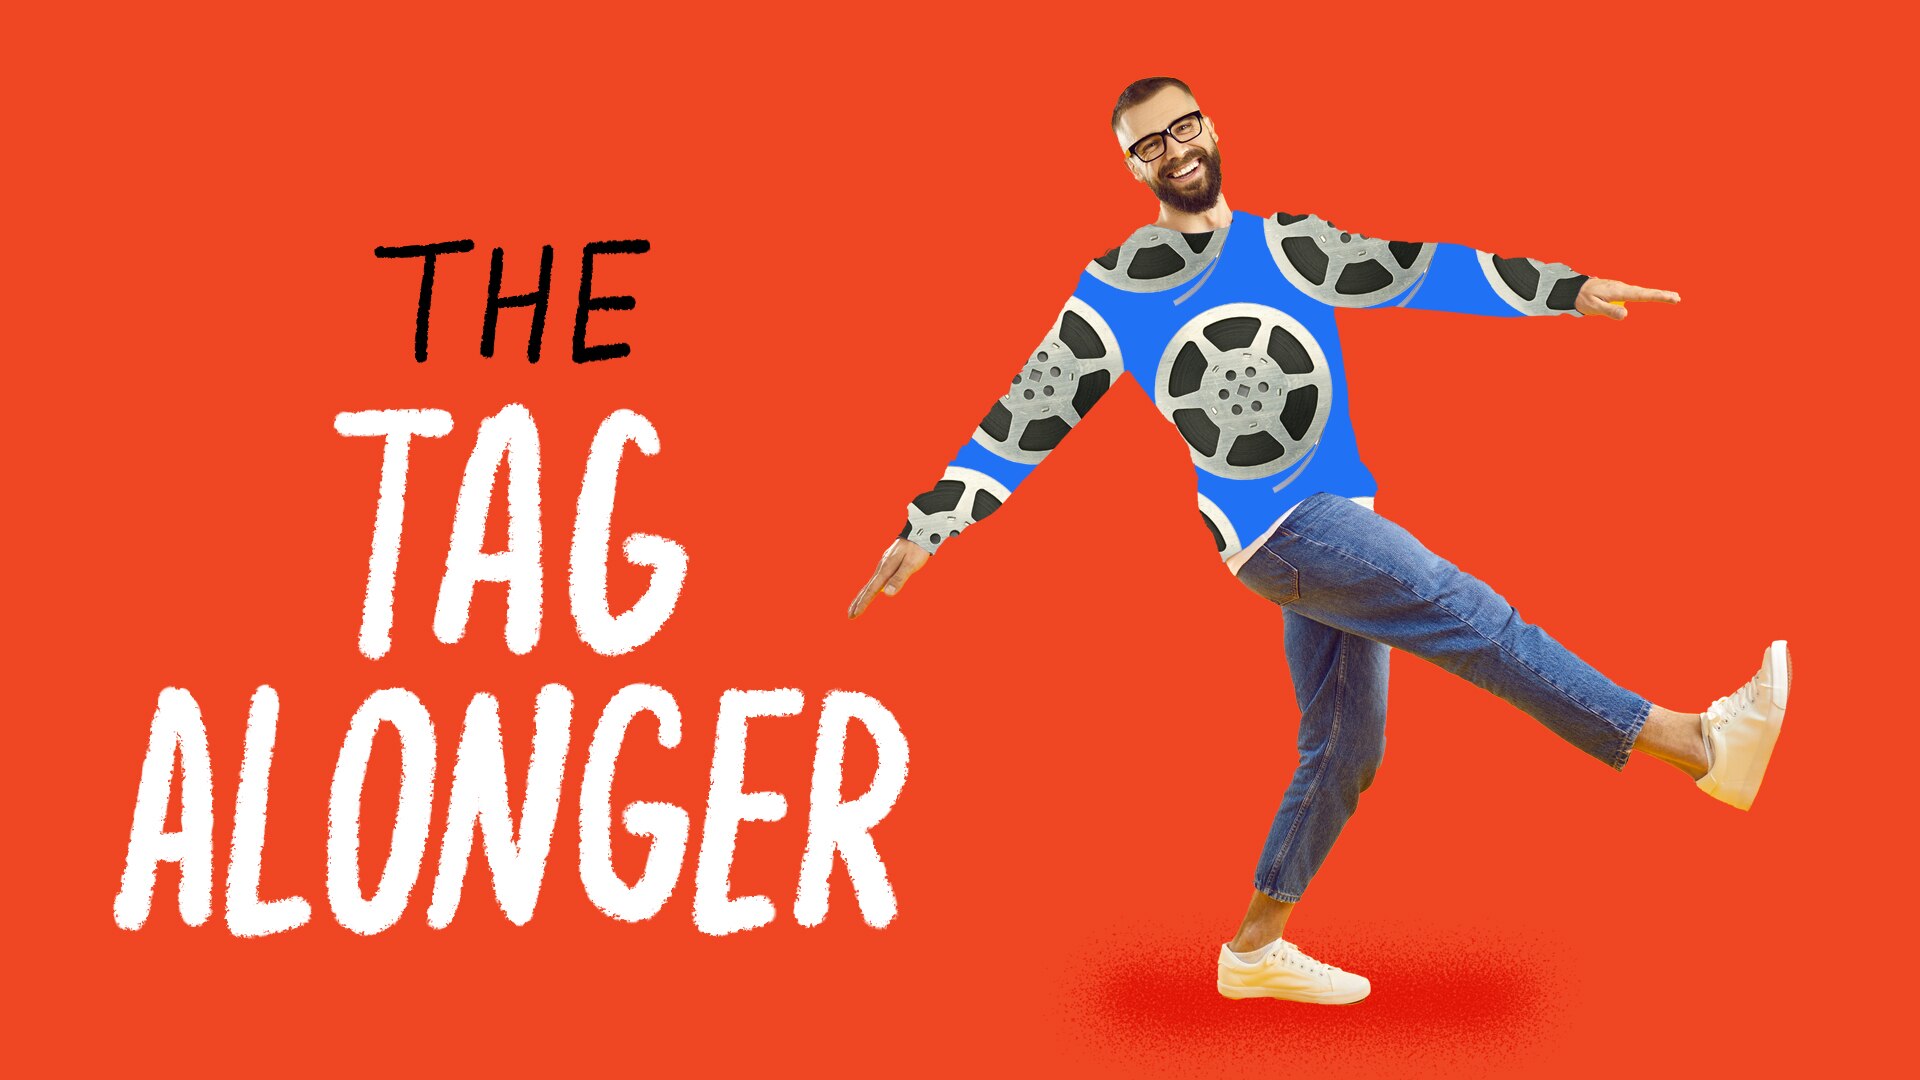 Subhead title: The Tag Alonger. Red background, man in blue jumper strikes silly pose with leg out and grin